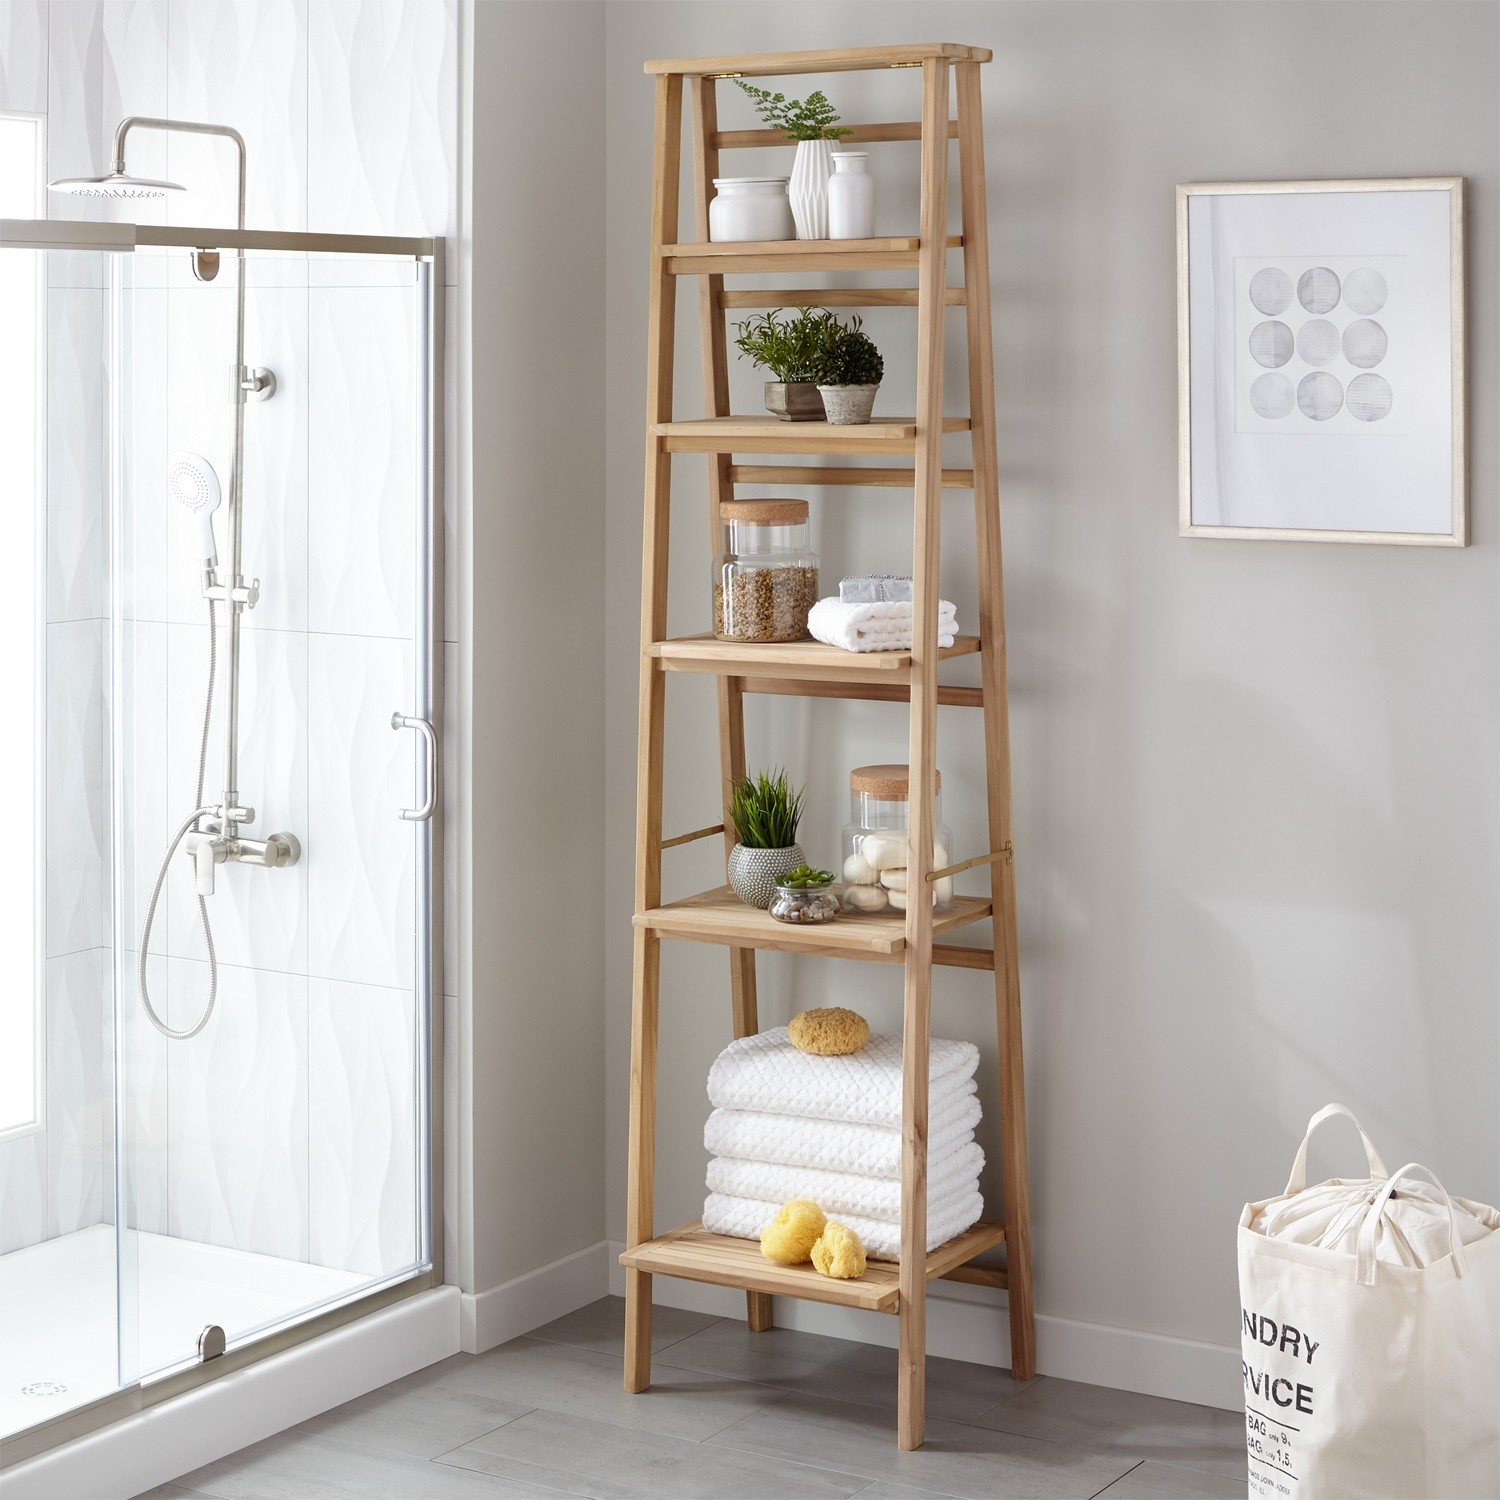 Bathroom shelving whether itu0027s is used in a bathroom or elsewhere in your home, itu0027s OFQDJRA